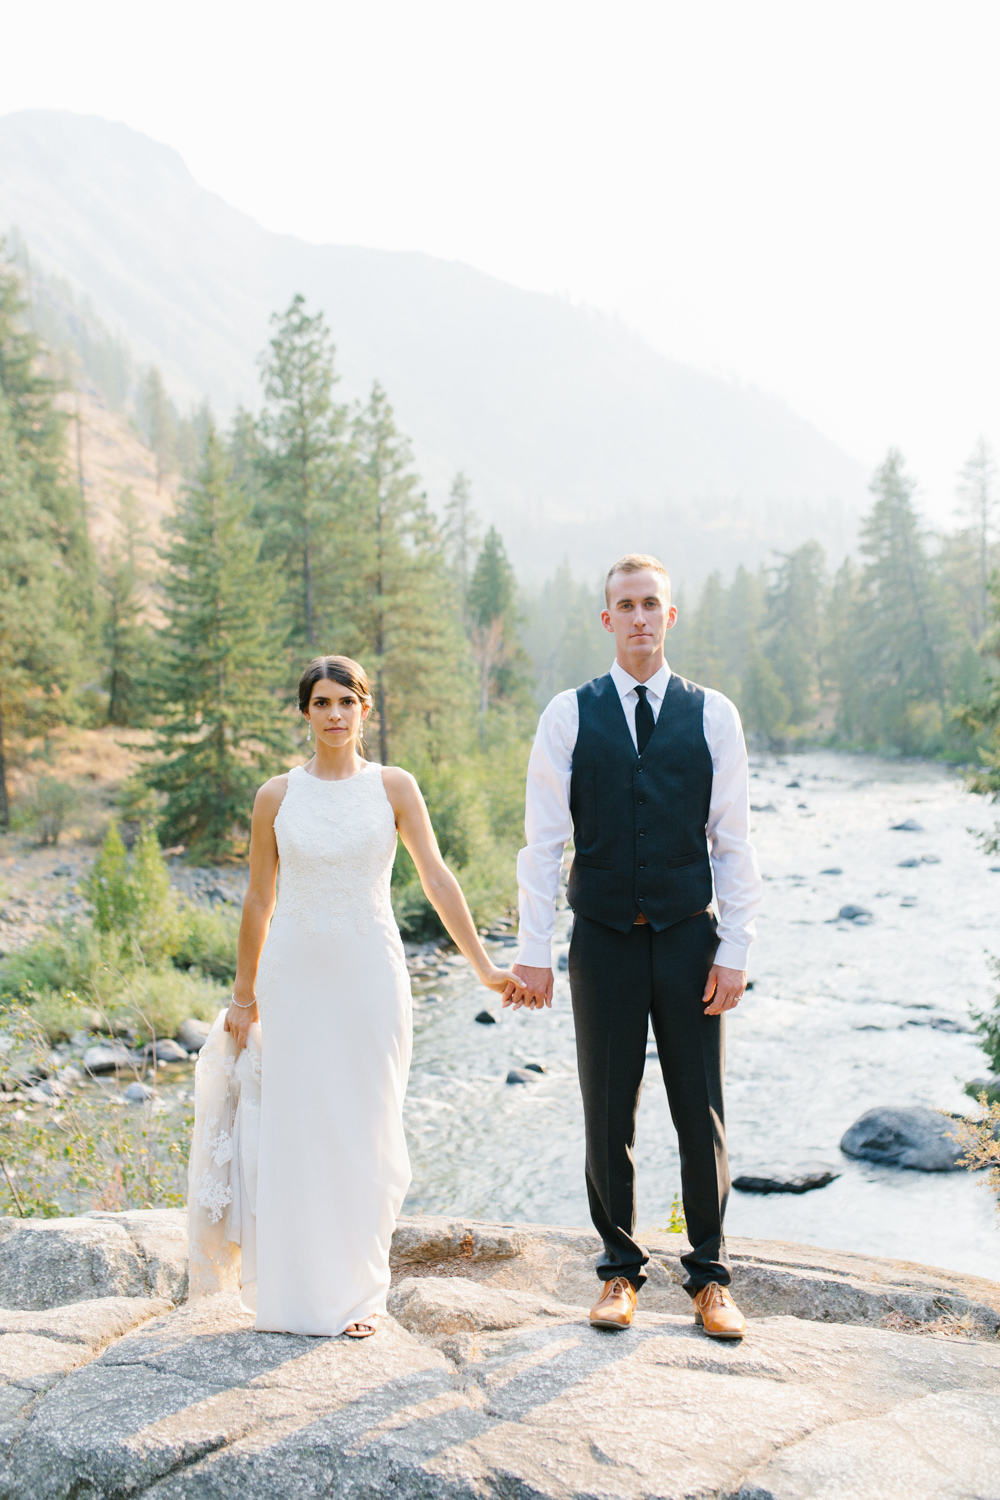 Grey and White Wedding in the Mountains of Leavenworth, Washington | Sleeping Lady | Classic and Timeless Wedding | VSCO | Stunning Mountain Top Bride and Groom Portraits on the Icicle River.jpg-3379.jpg